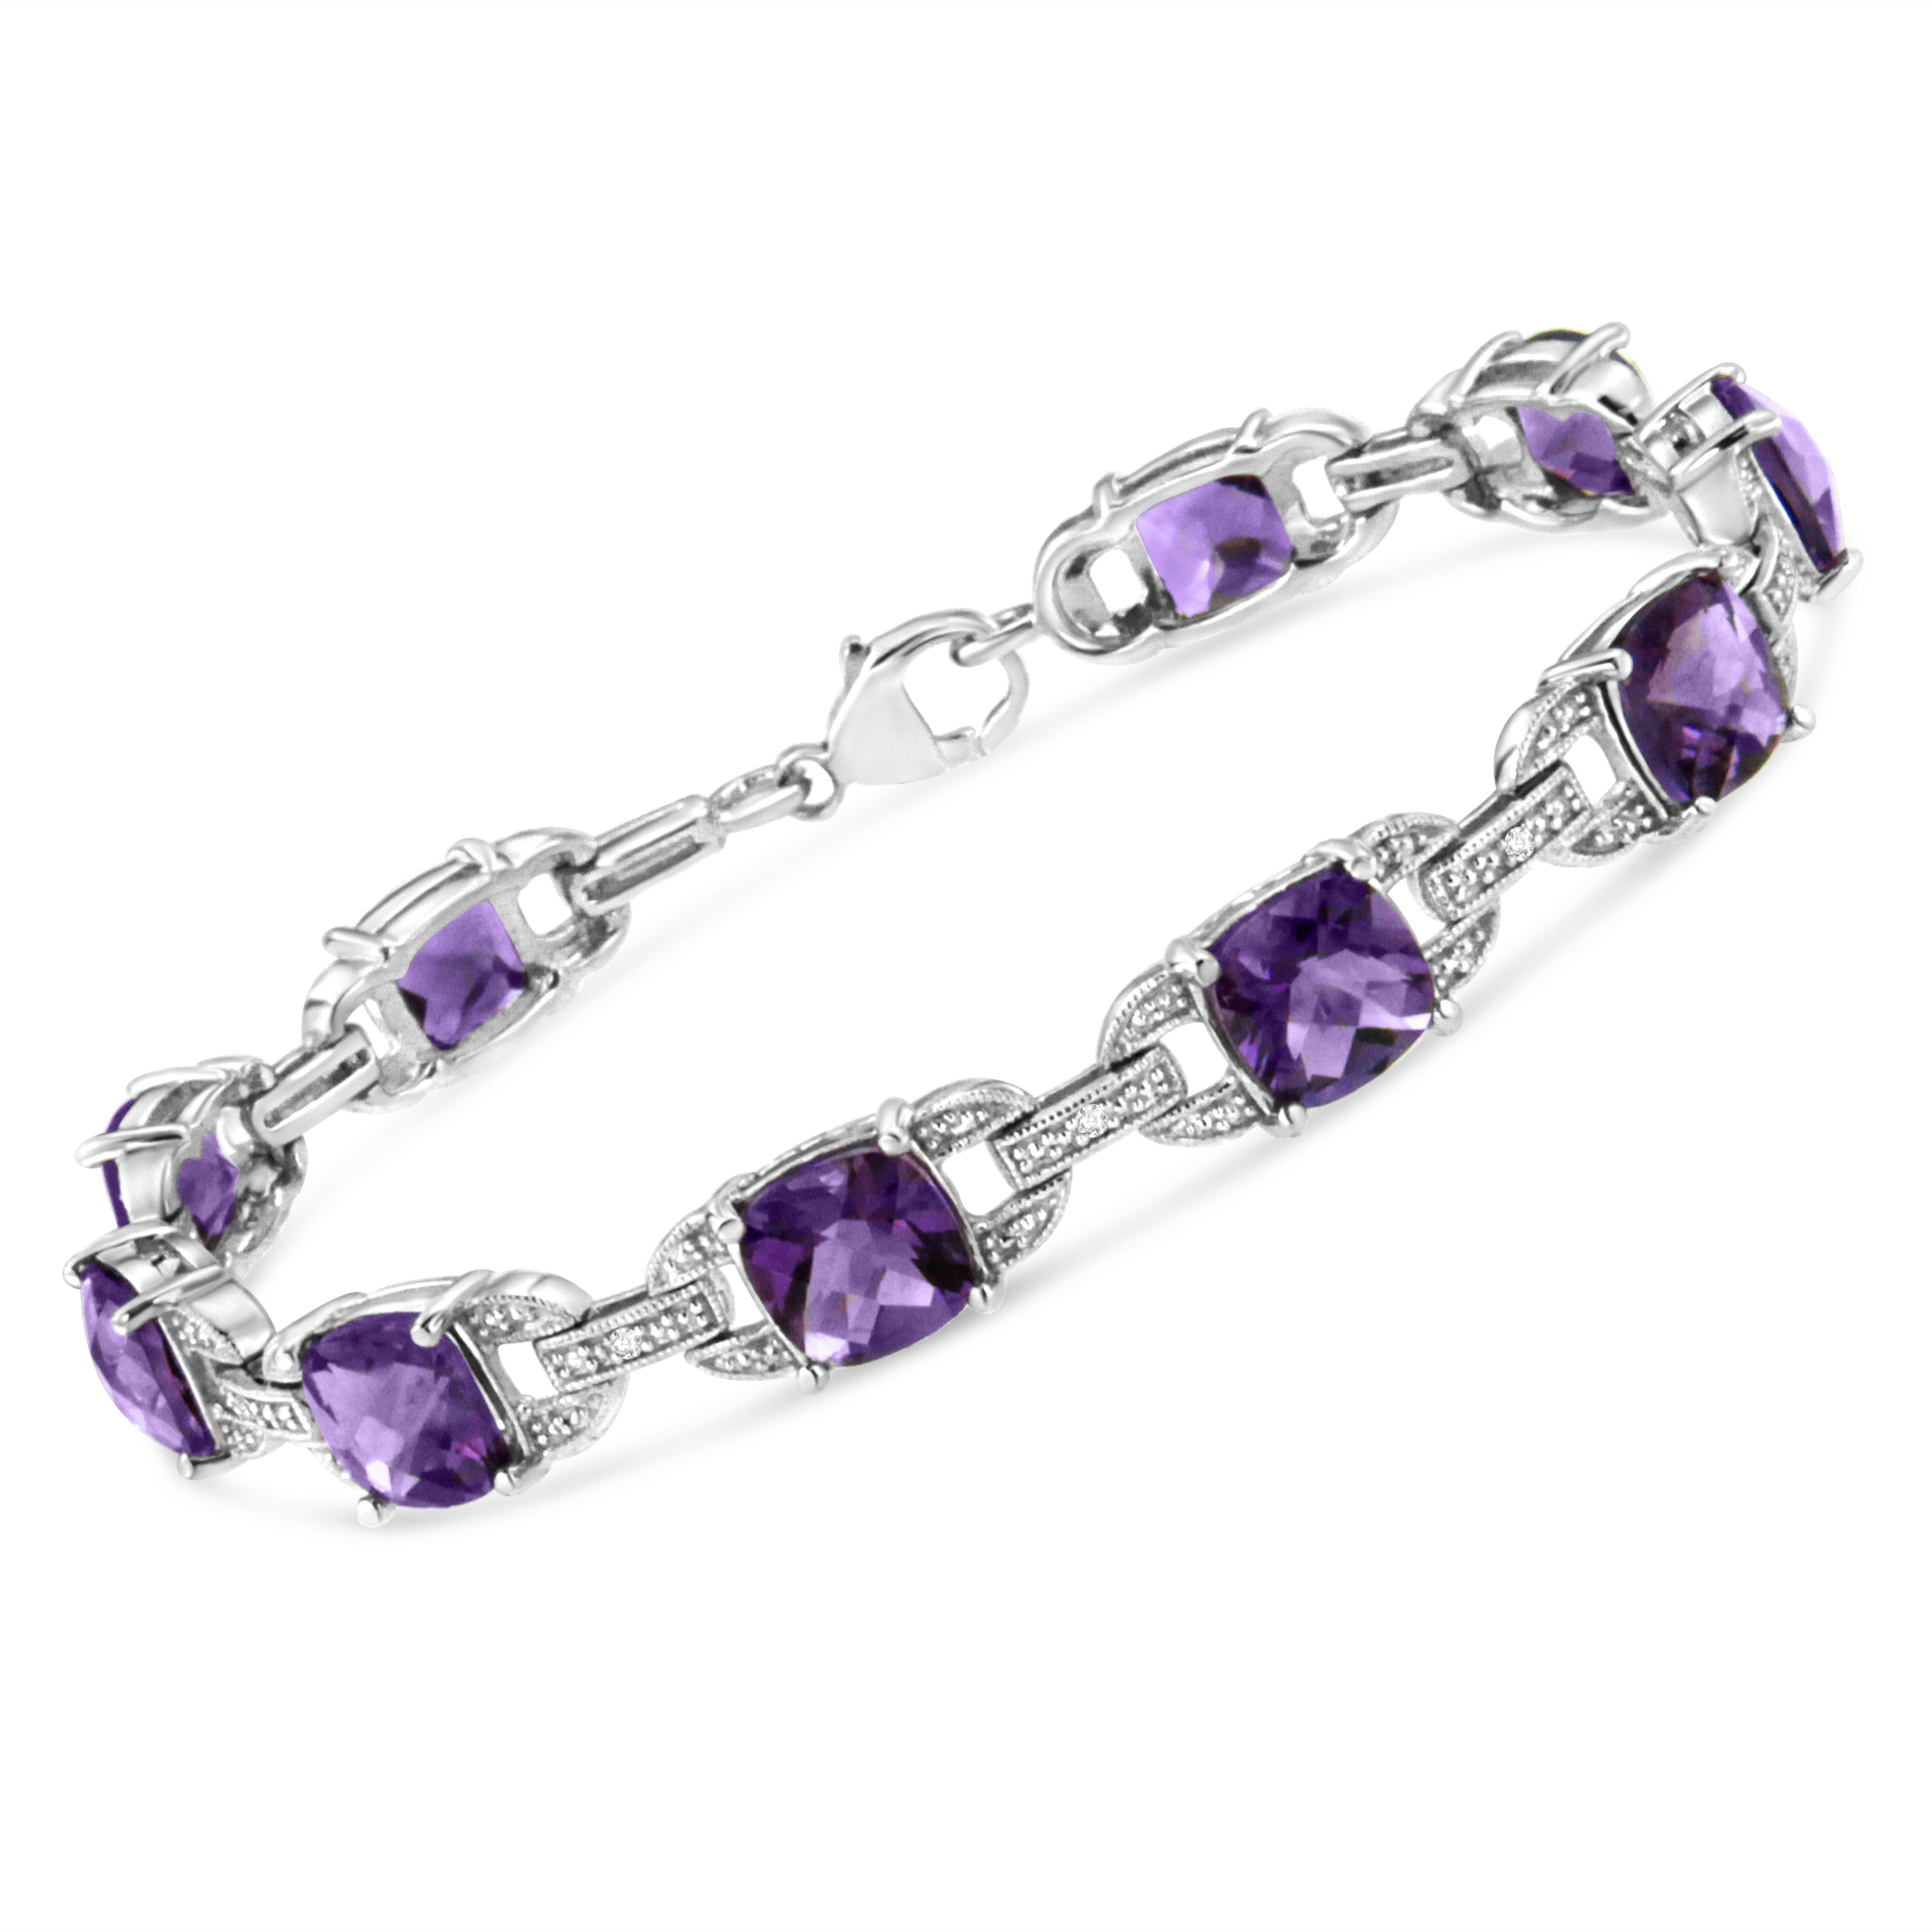 Classy and feminine, this amethyst and diamond tennis bracelet is designed especially for your lady love. Styled in remarkable sterling silver this bracelet is embellished with 10 alluring prong set cushion cut amethyst accentuated by 10 brilliant